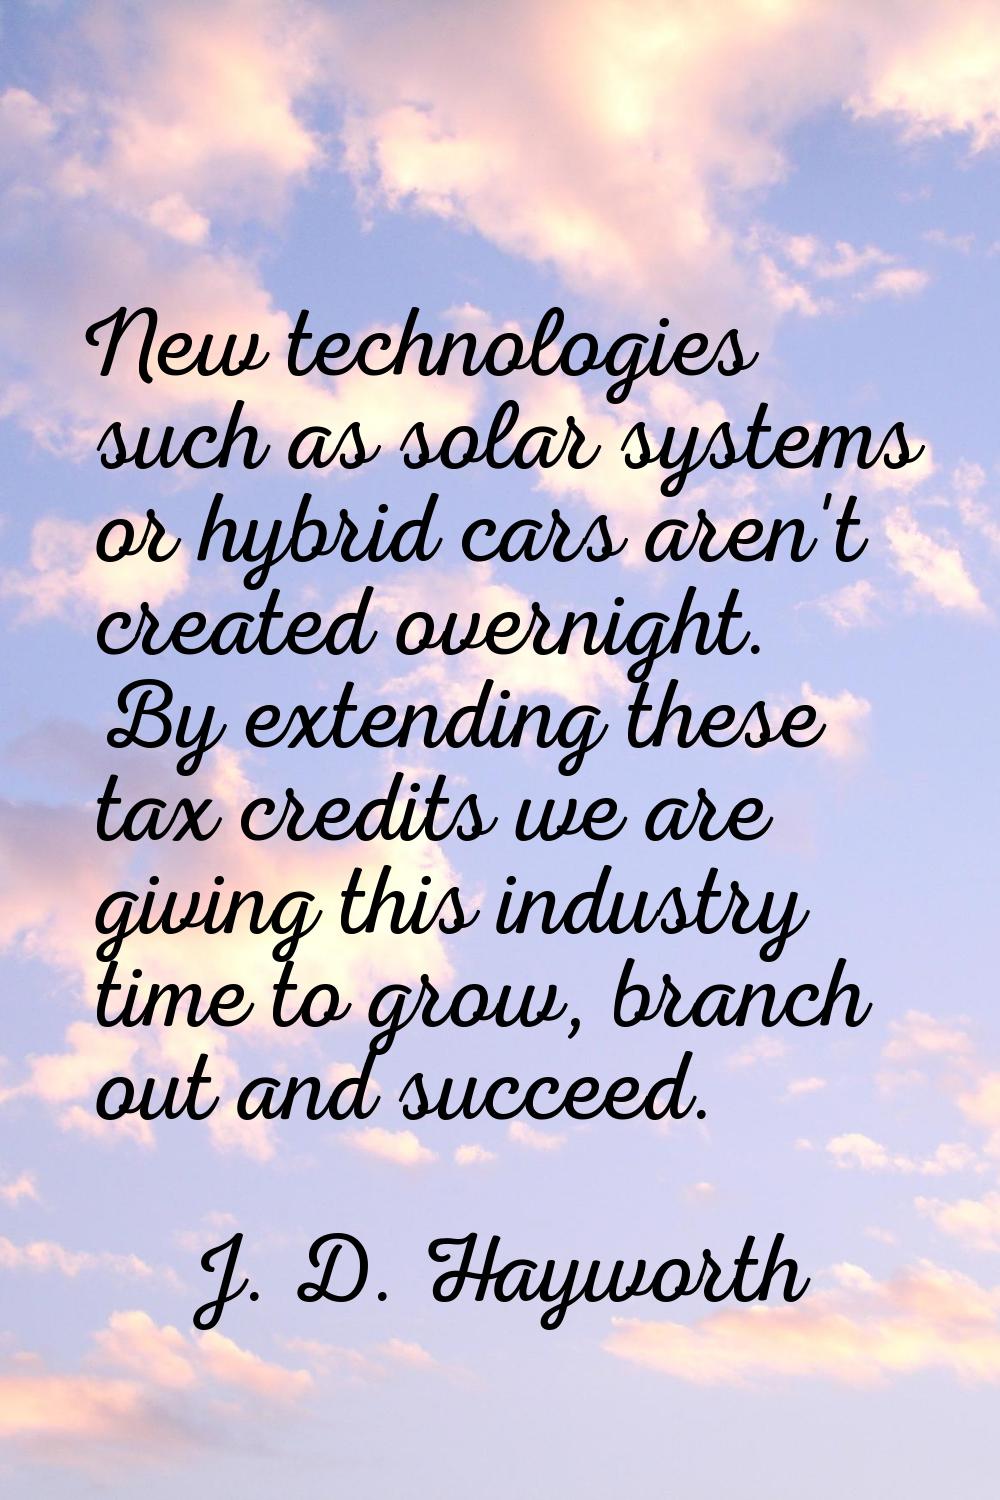 New technologies such as solar systems or hybrid cars aren't created overnight. By extending these 